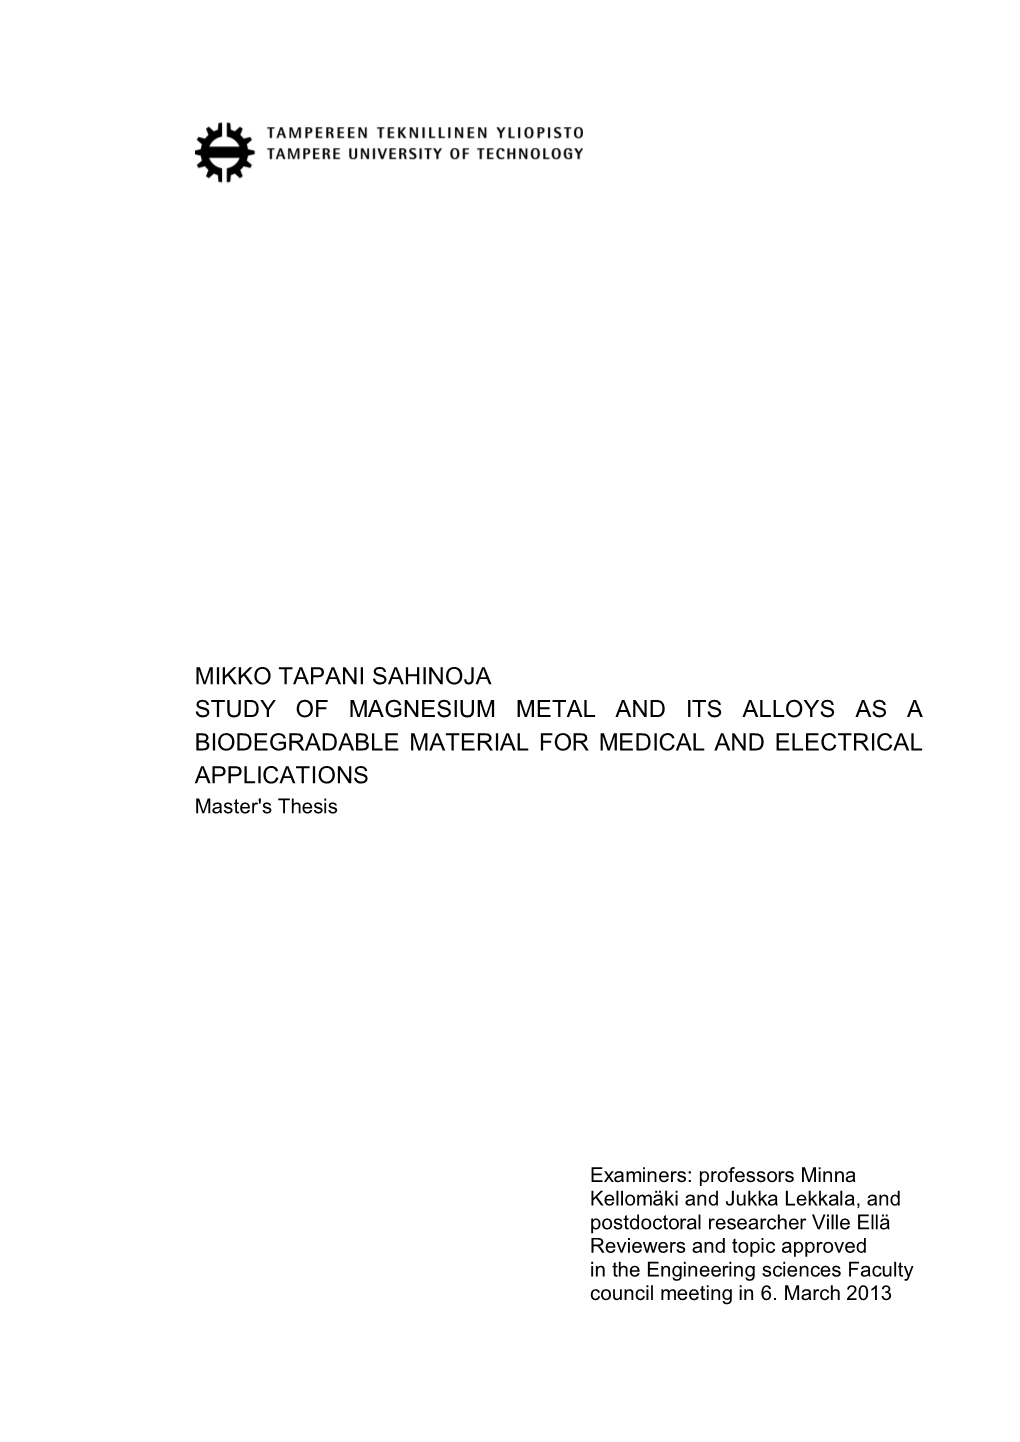 MIKKO TAPANI SAHINOJA STUDY of MAGNESIUM METAL and ITS ALLOYS AS a BIODEGRADABLE MATERIAL for MEDICAL and ELECTRICAL APPLICATIONS Master's Thesis